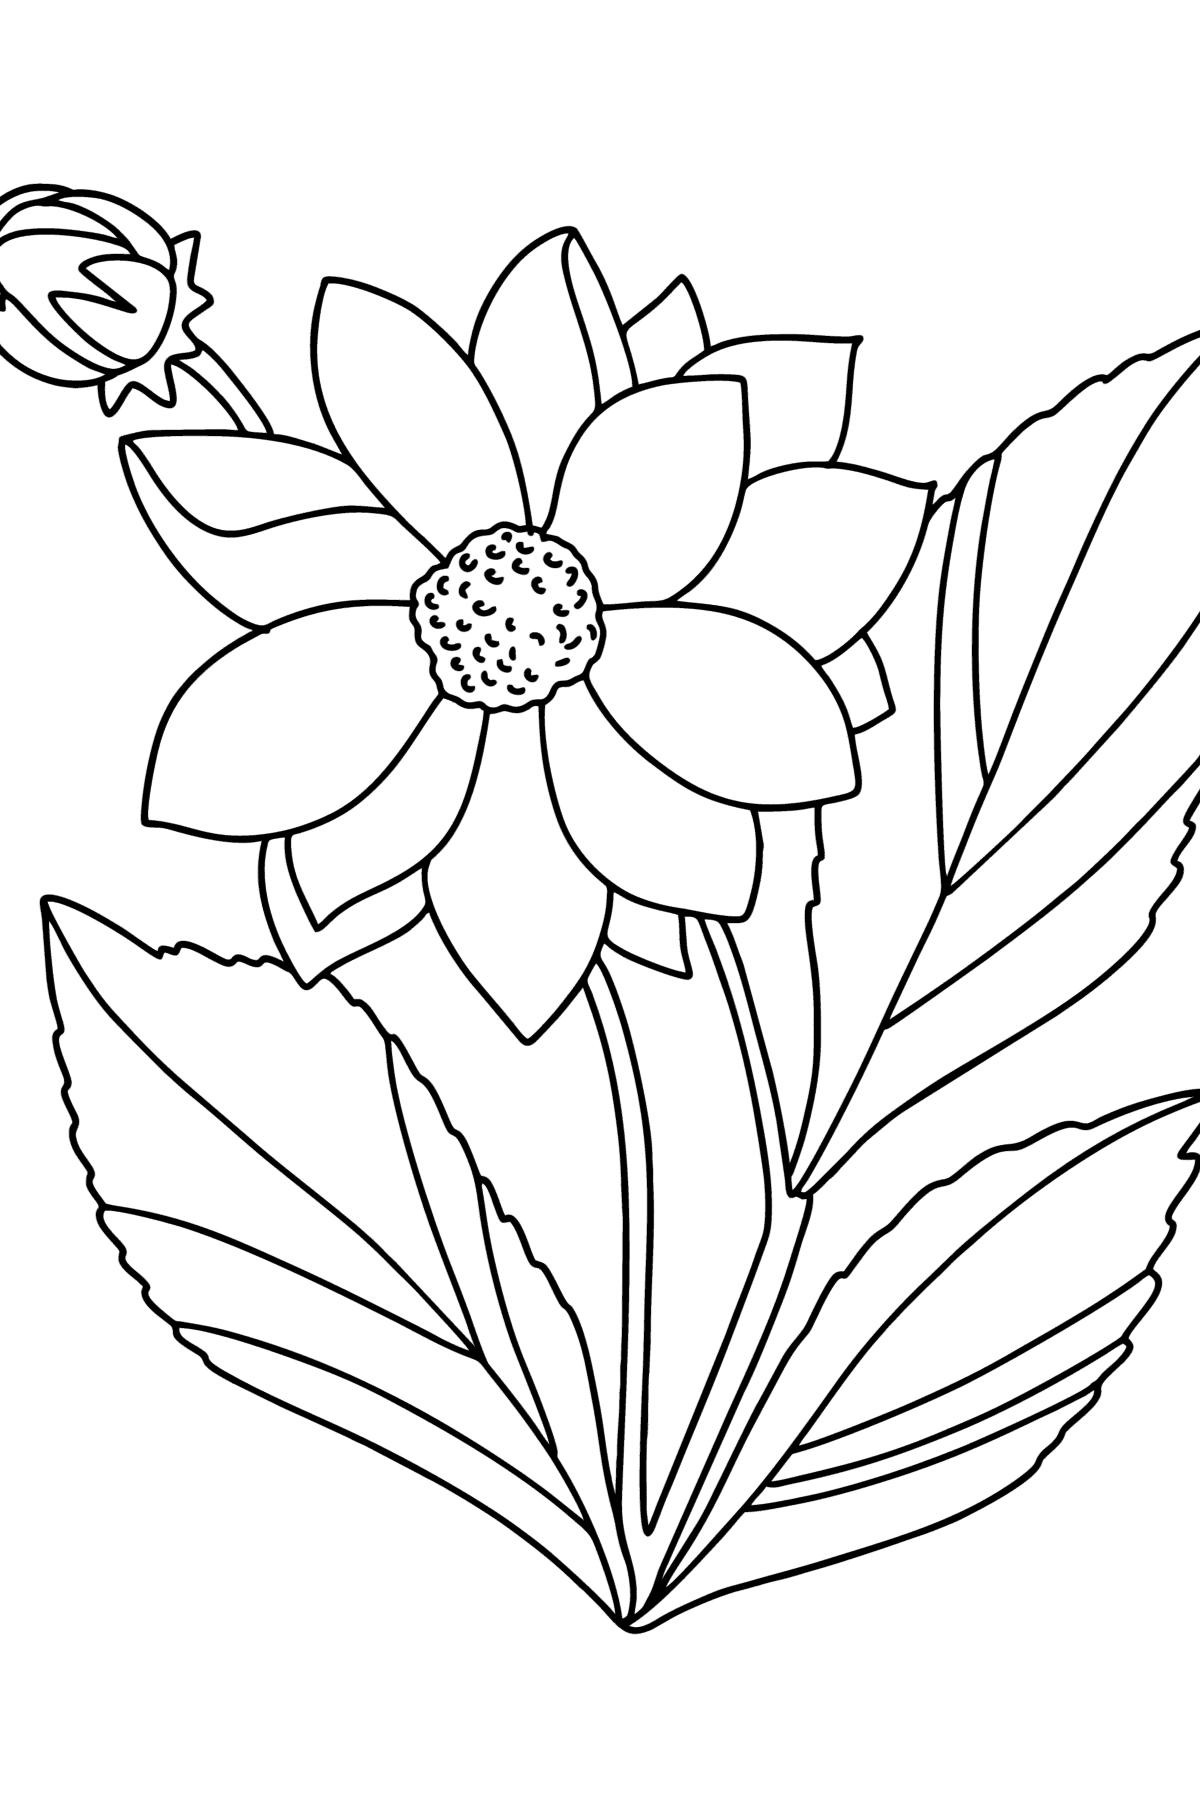 Dahlias coloring page - Coloring Pages for Kids